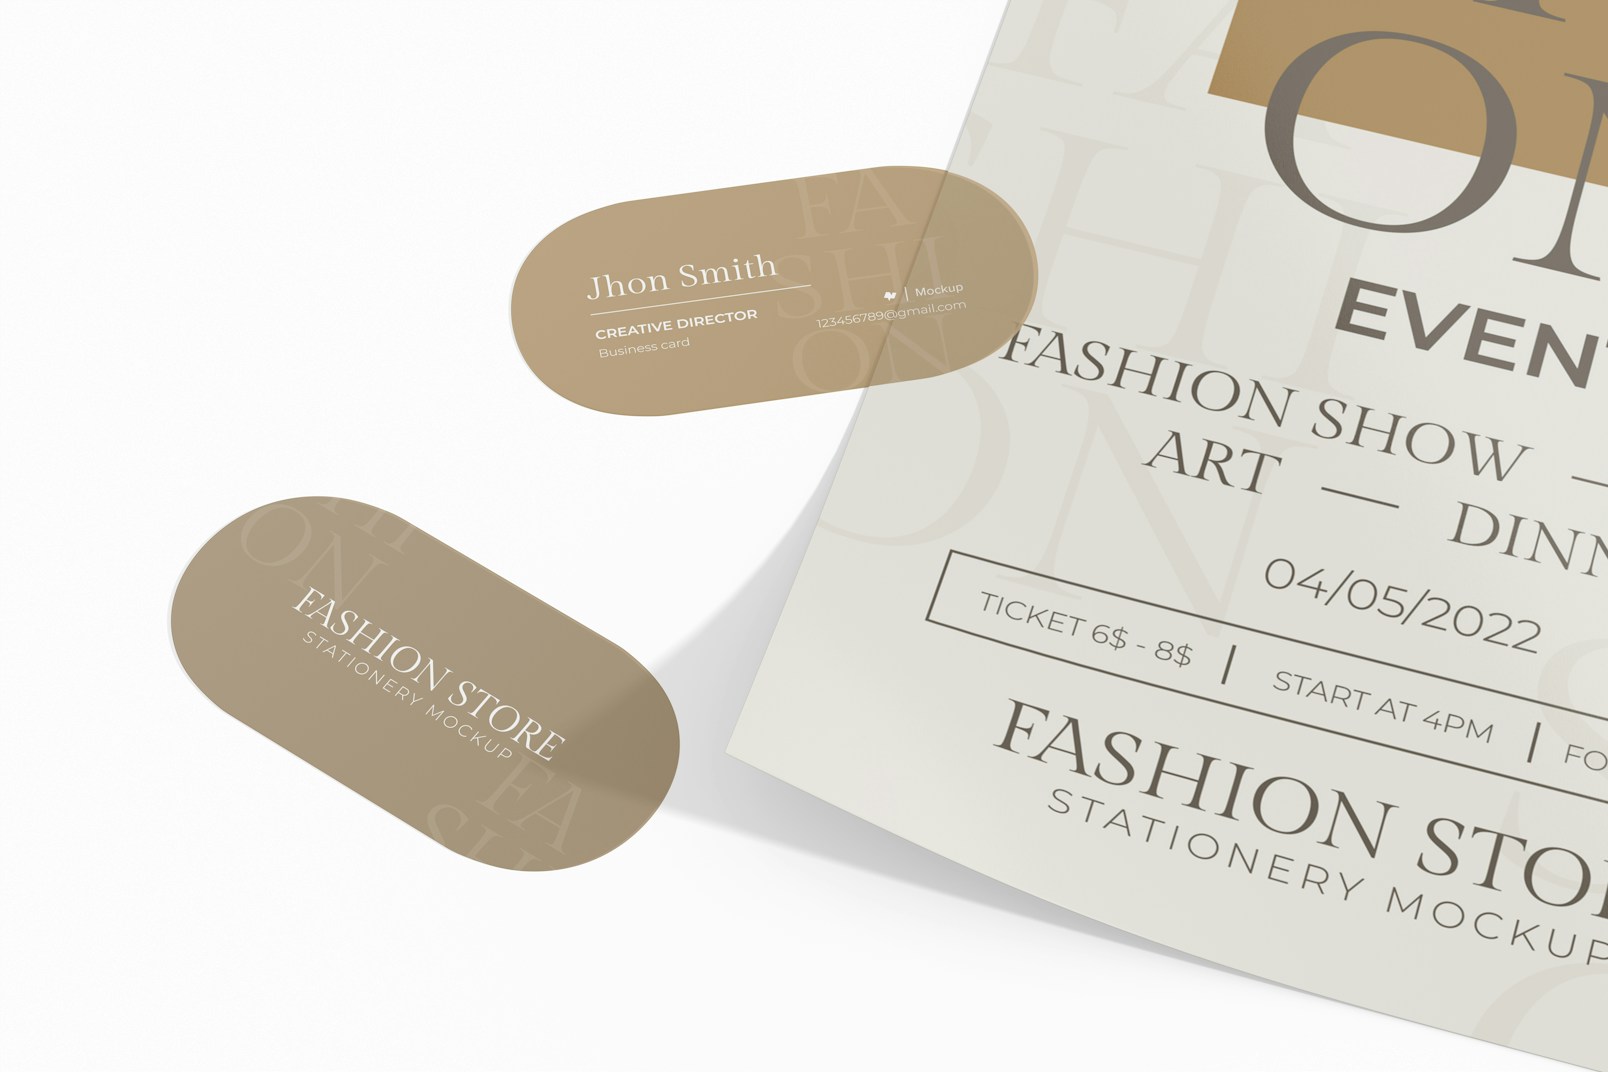 Fashion Store Business Card Mockup, with Flyer